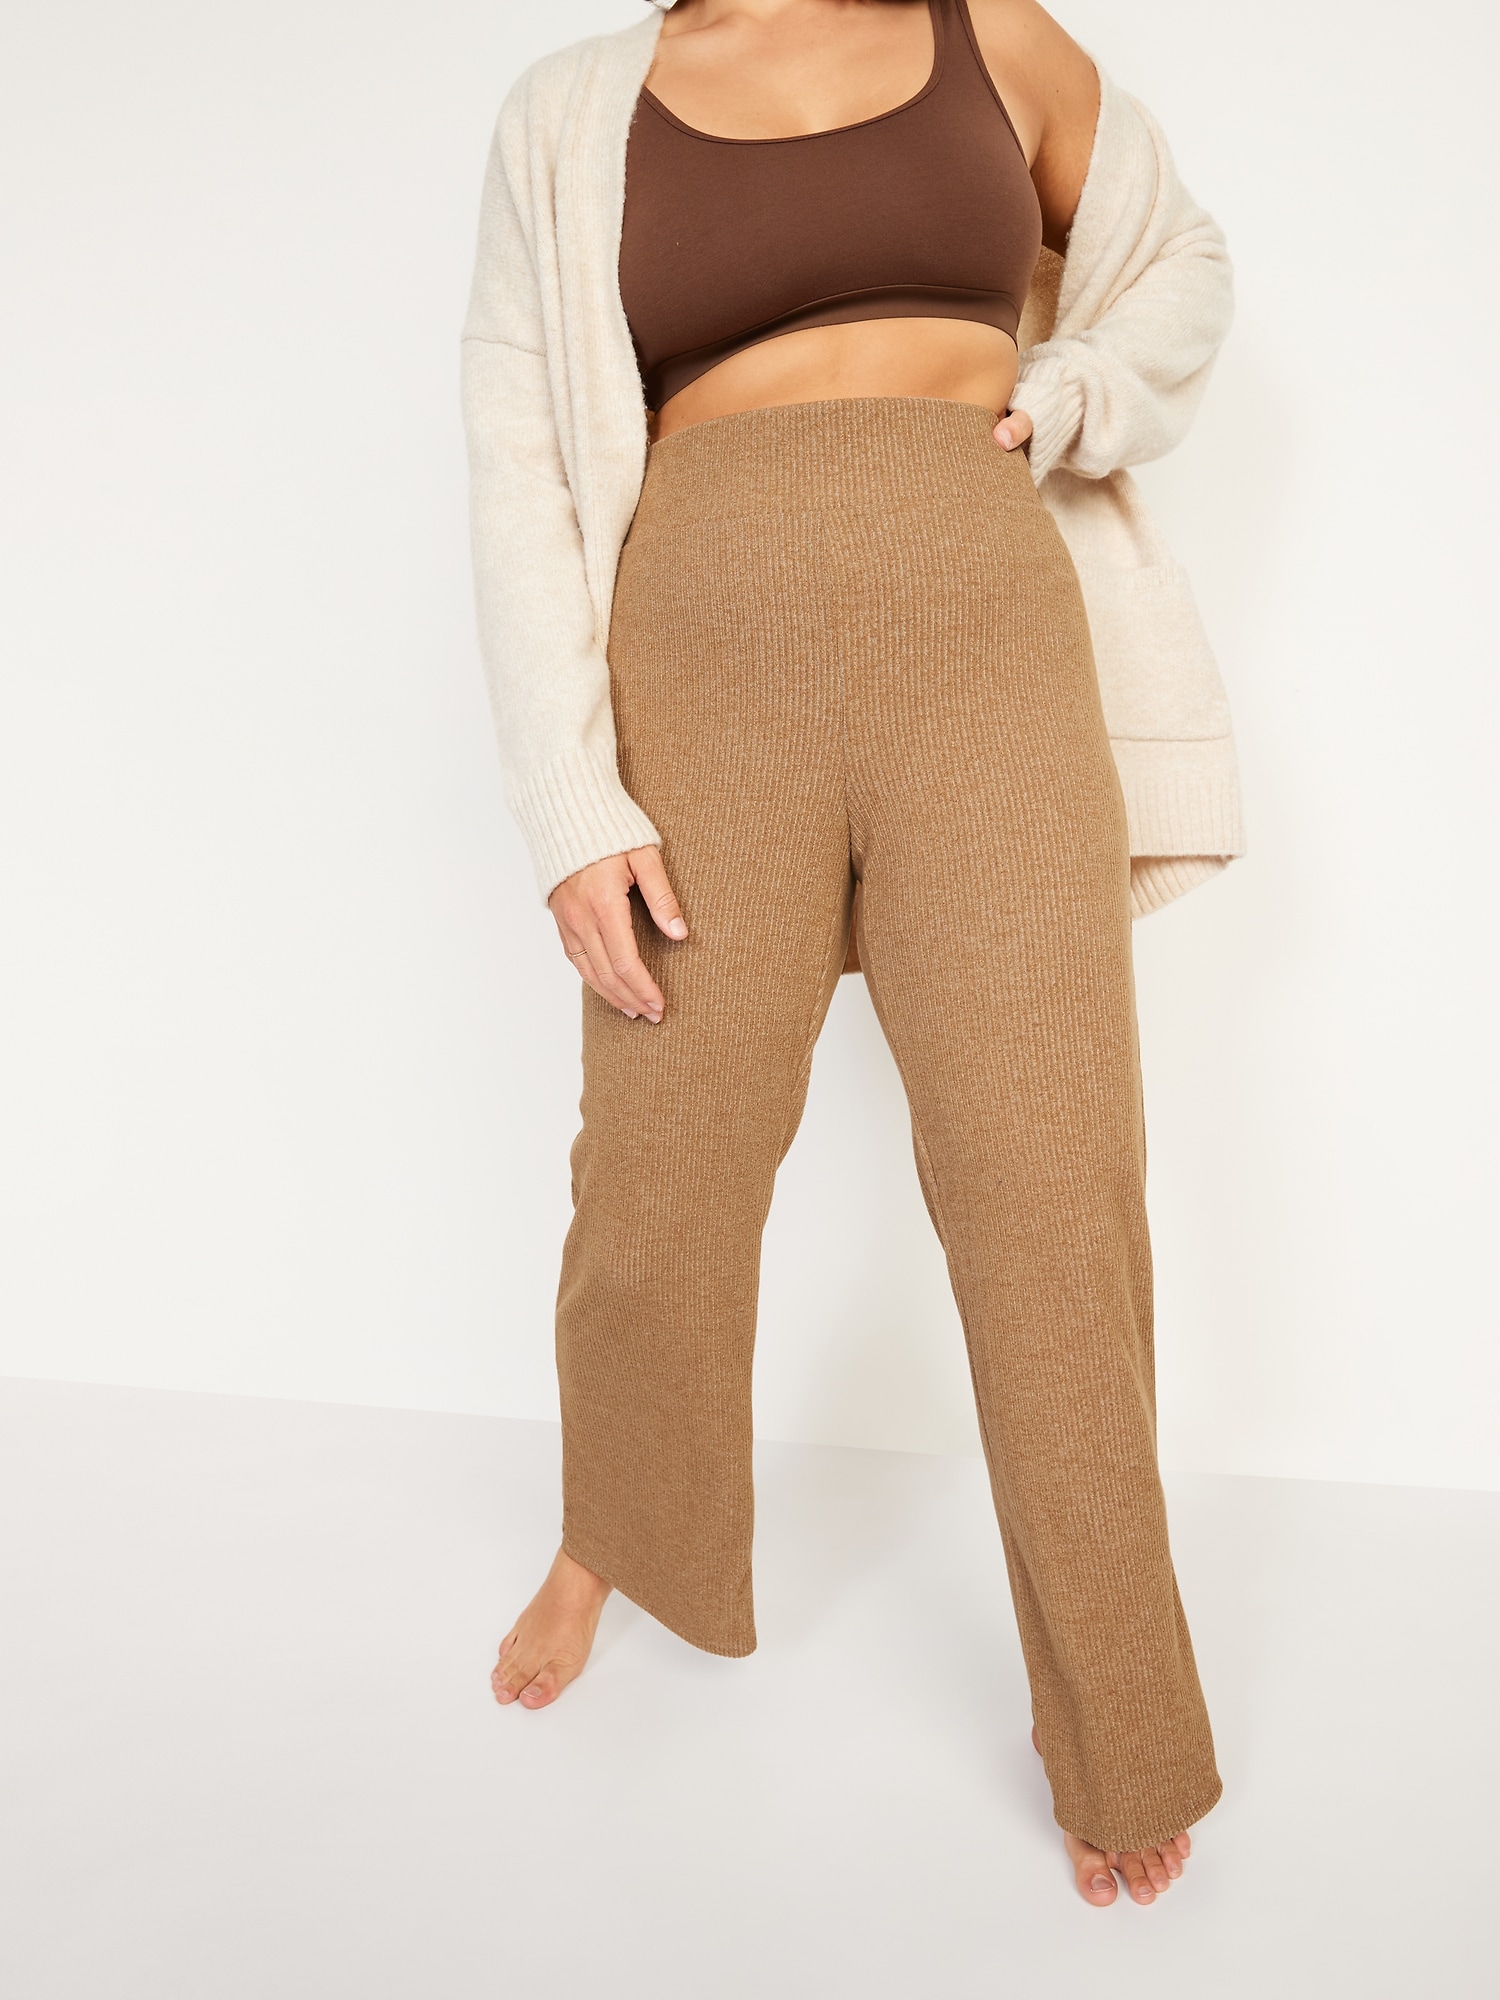 Women's High-waisted Cozy Ribbed Lounge Flare Leggings - Wild